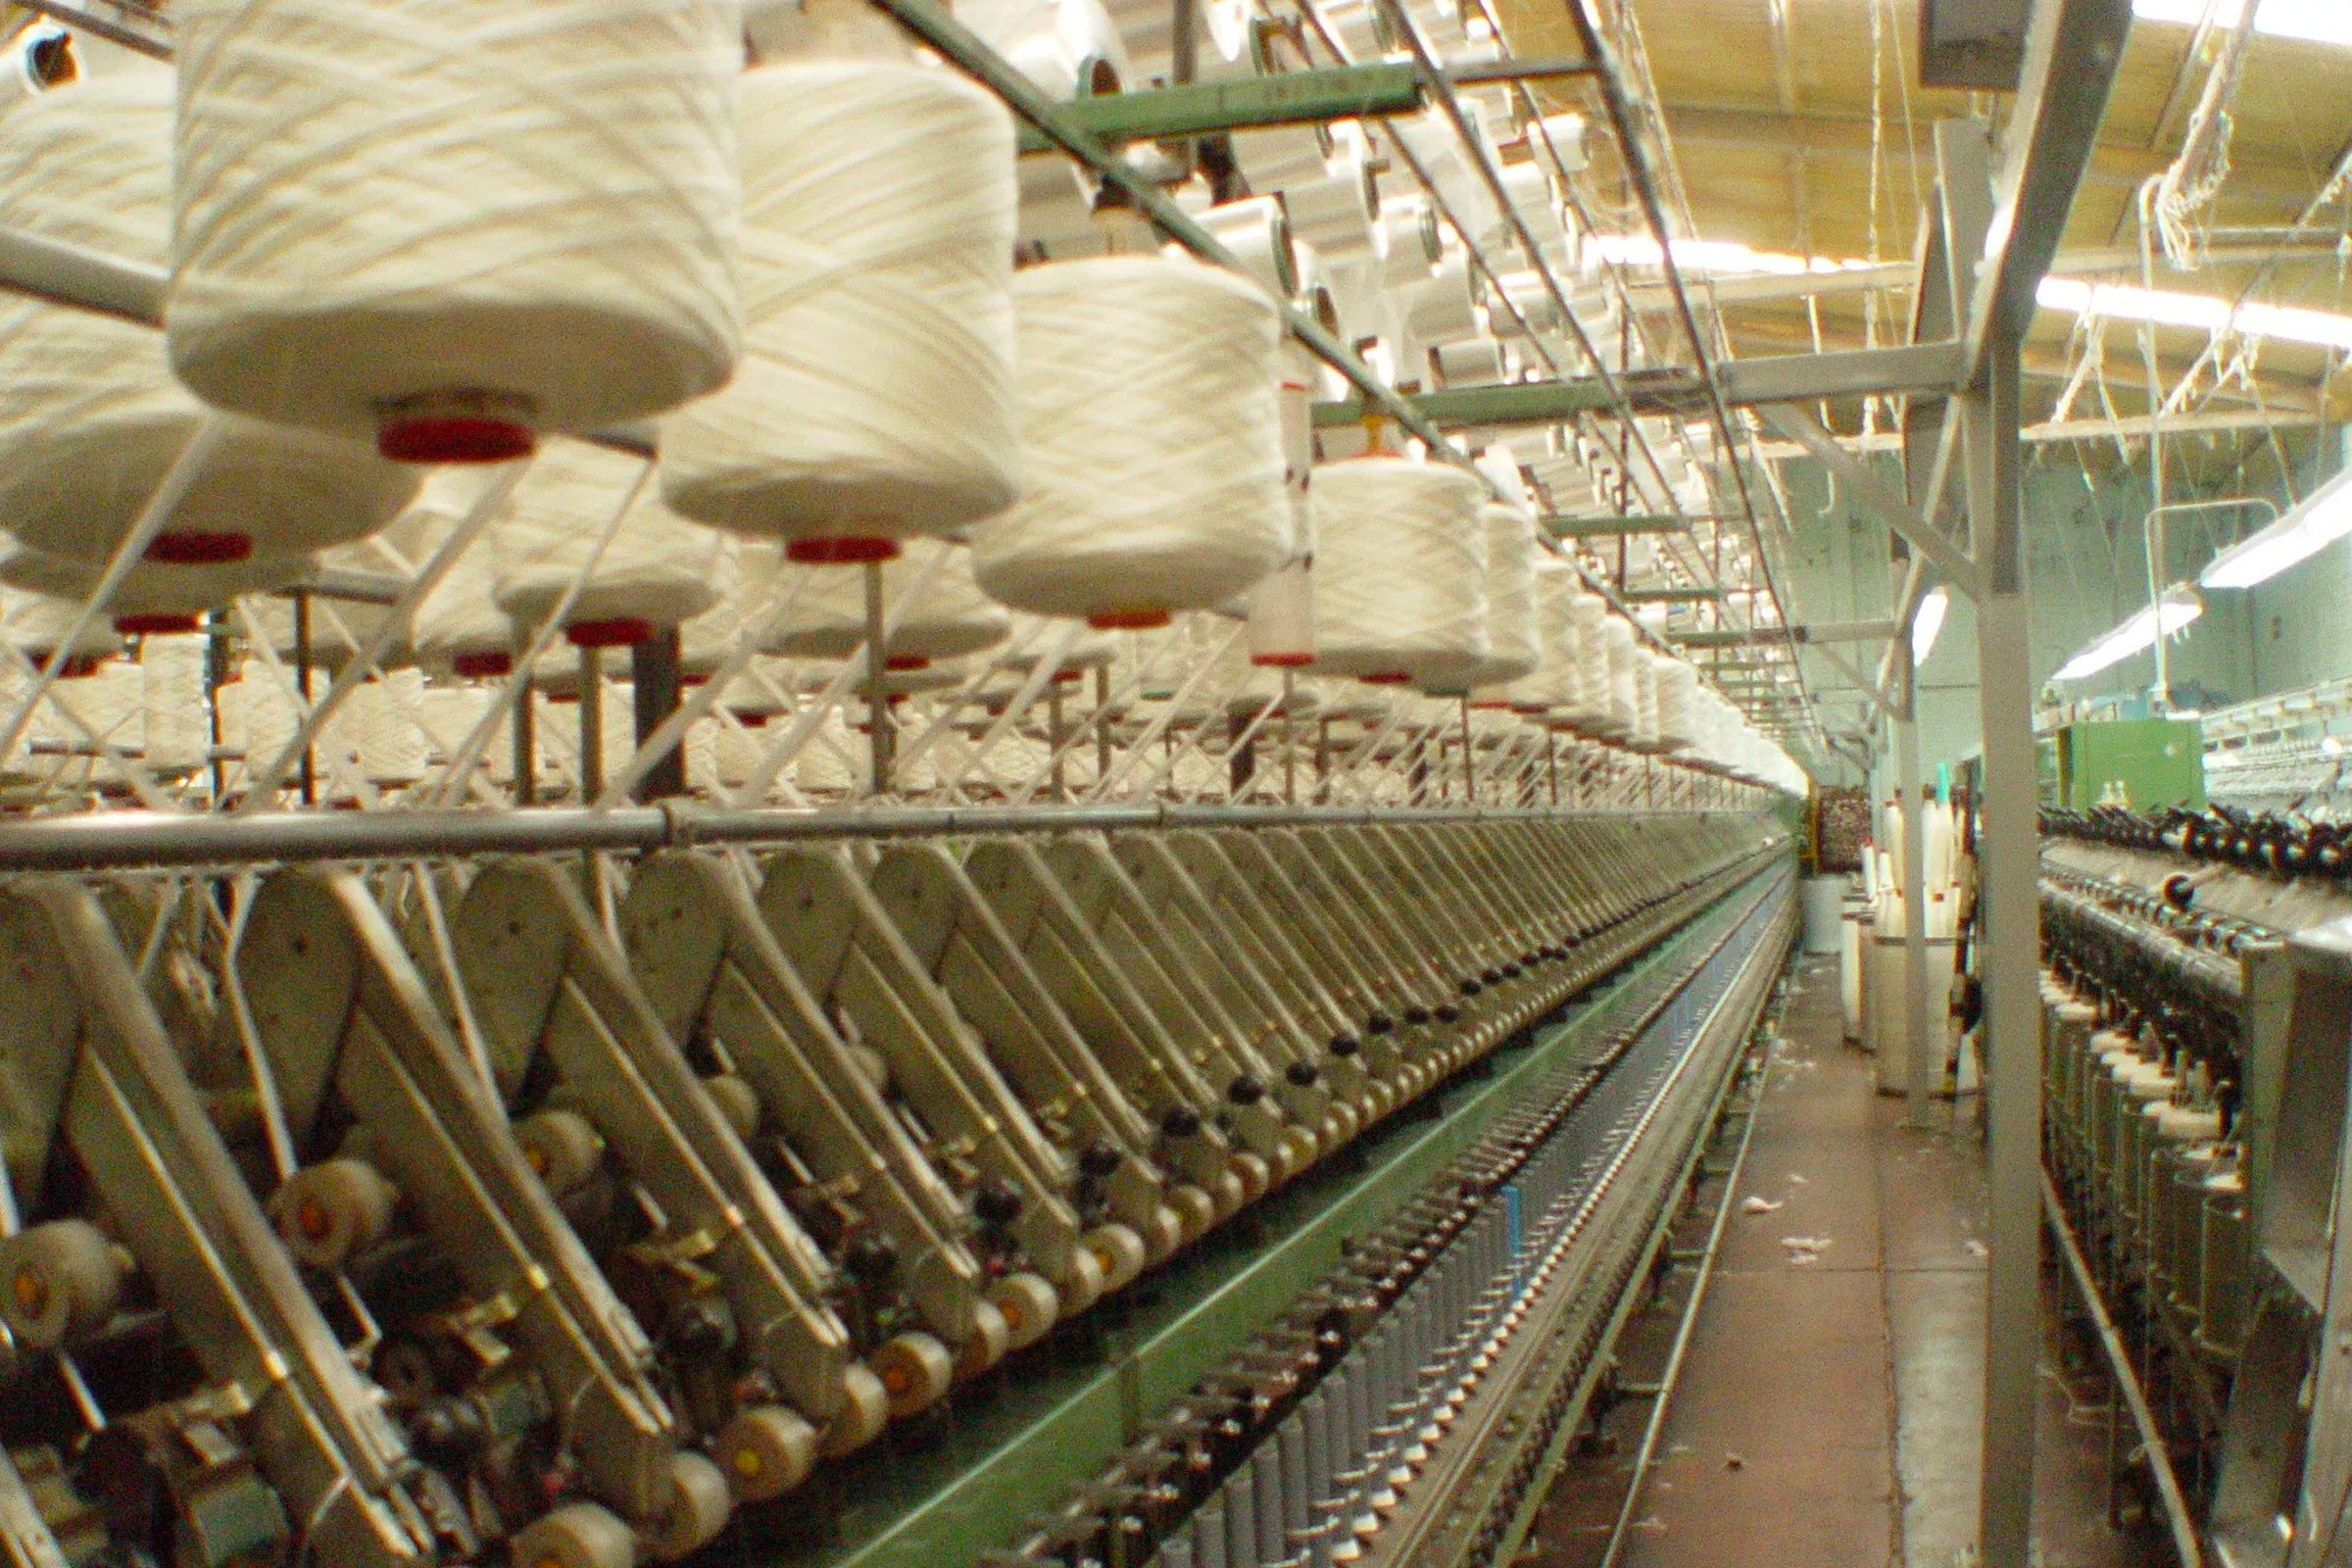 Know Your Clothes: What is Ringspun Cotton?